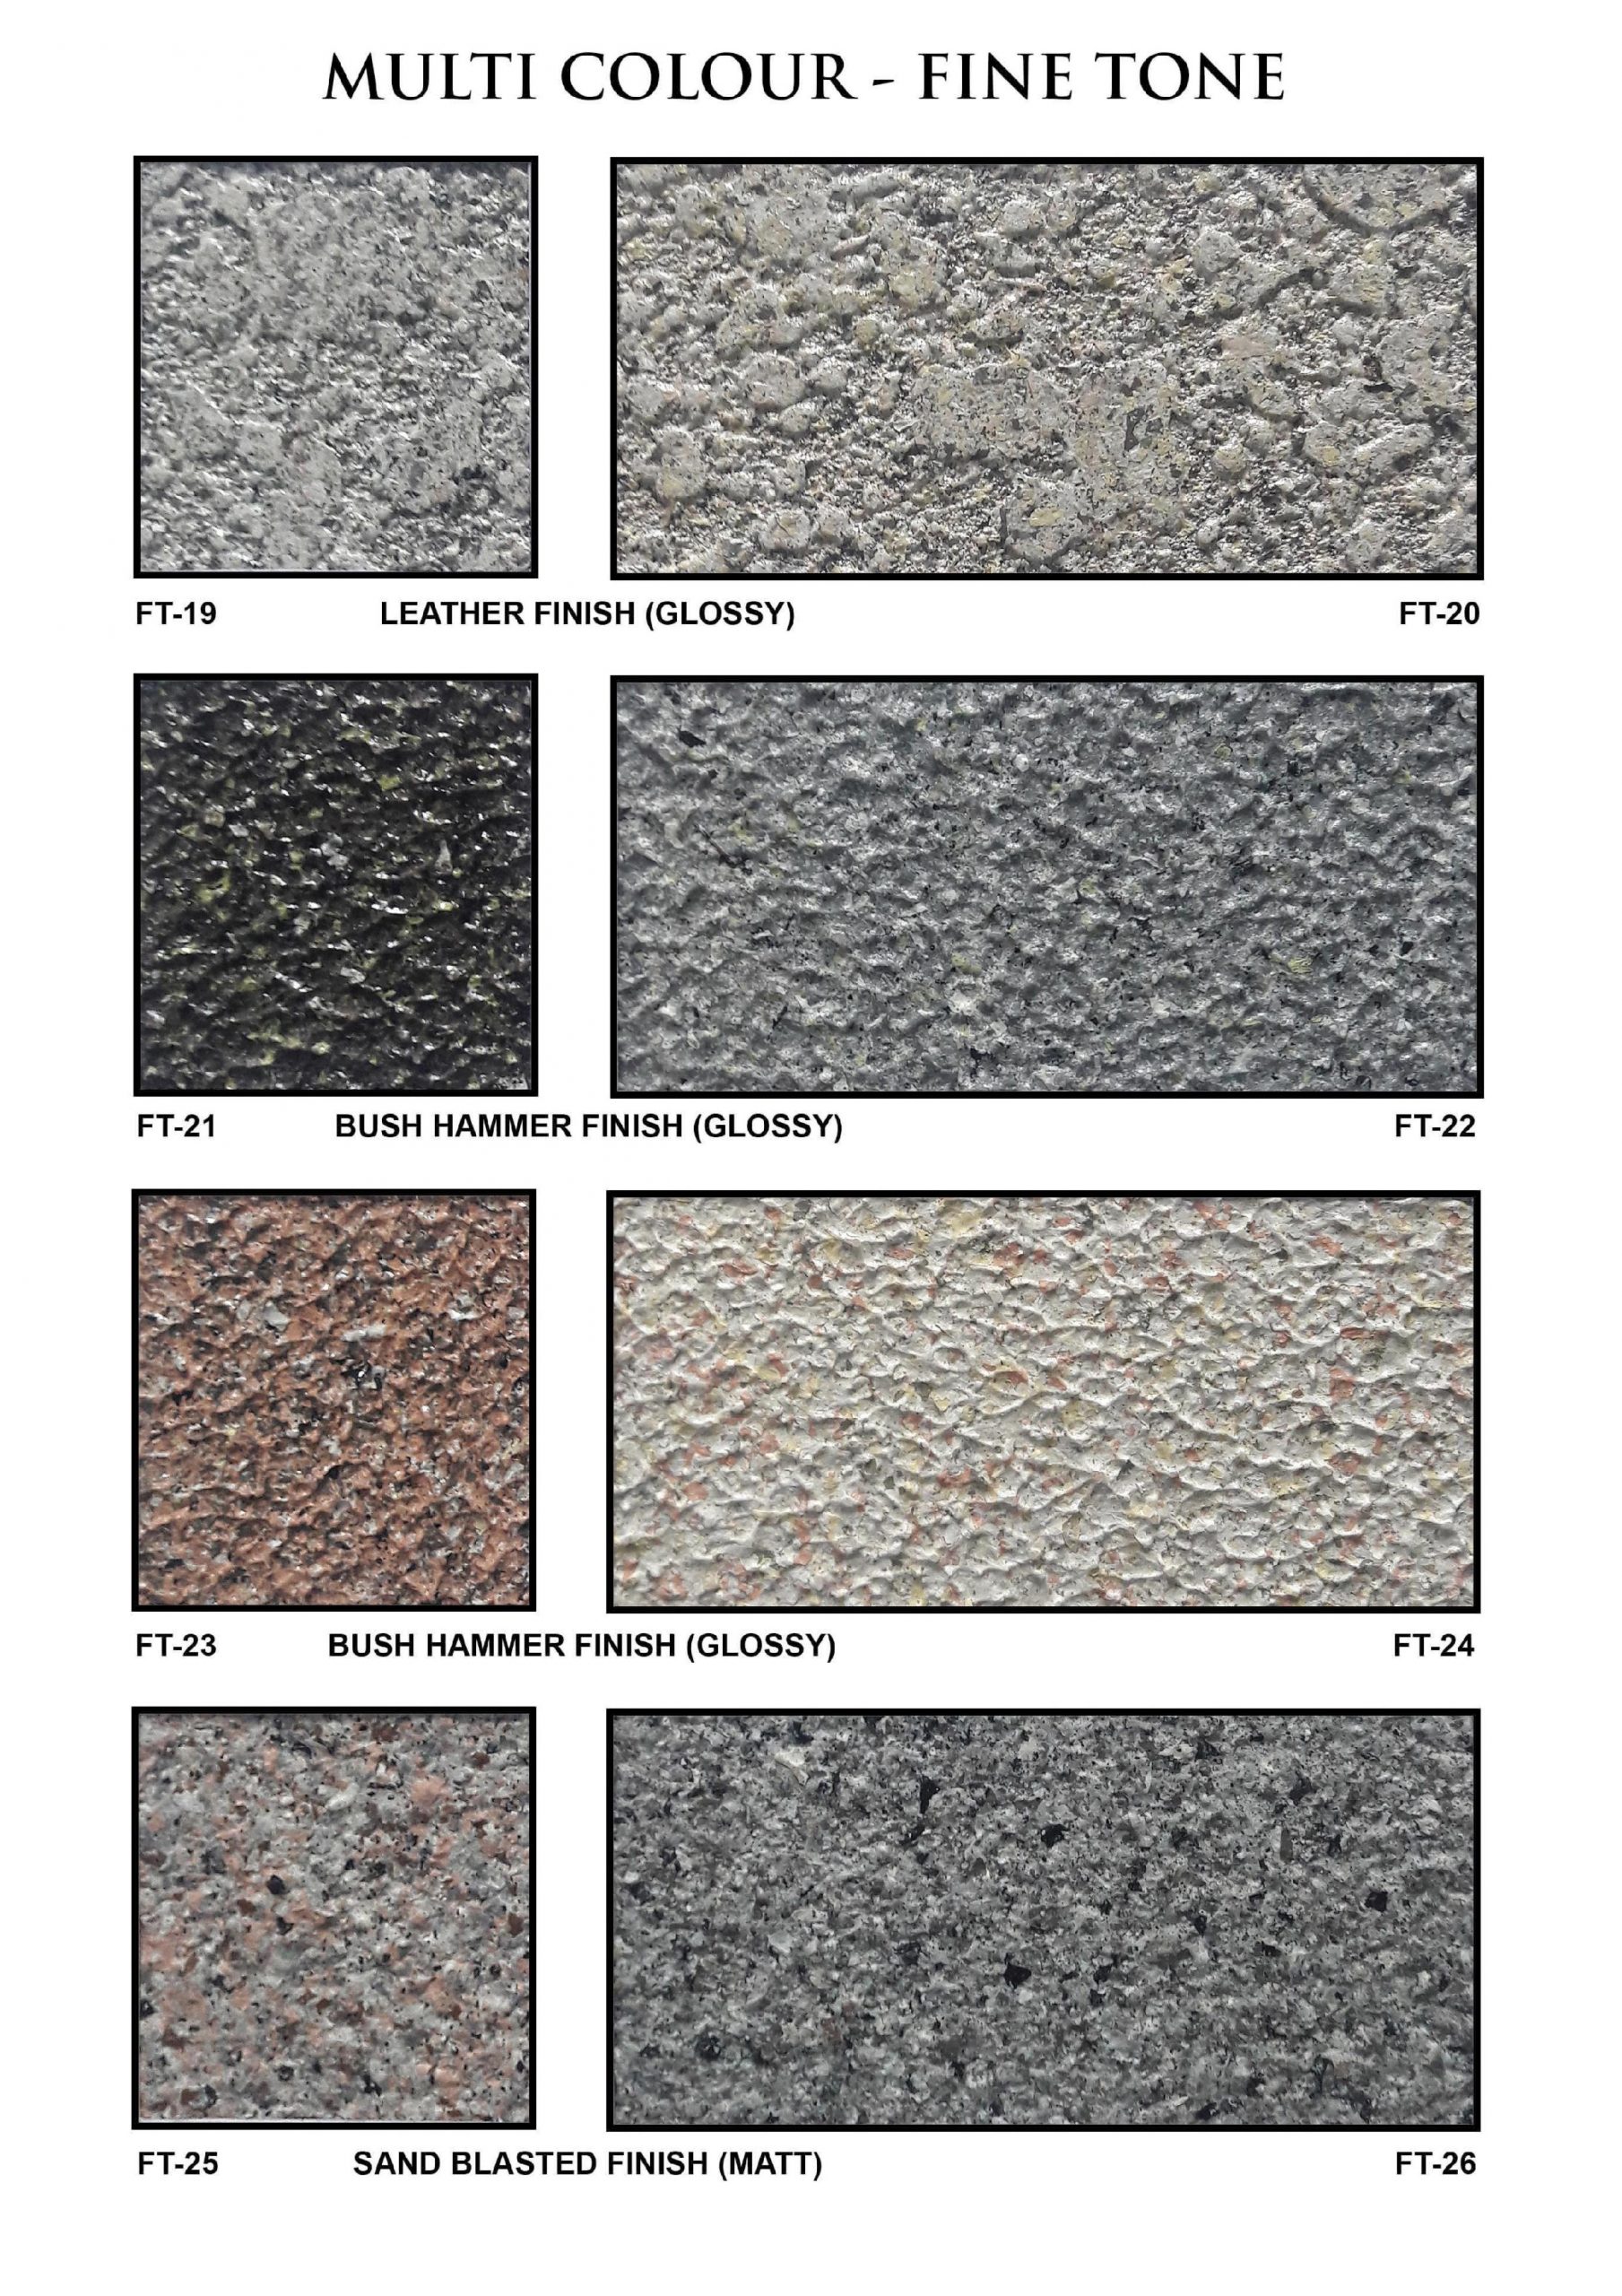 Multicolor Granite Shadecard 2 scaled 1